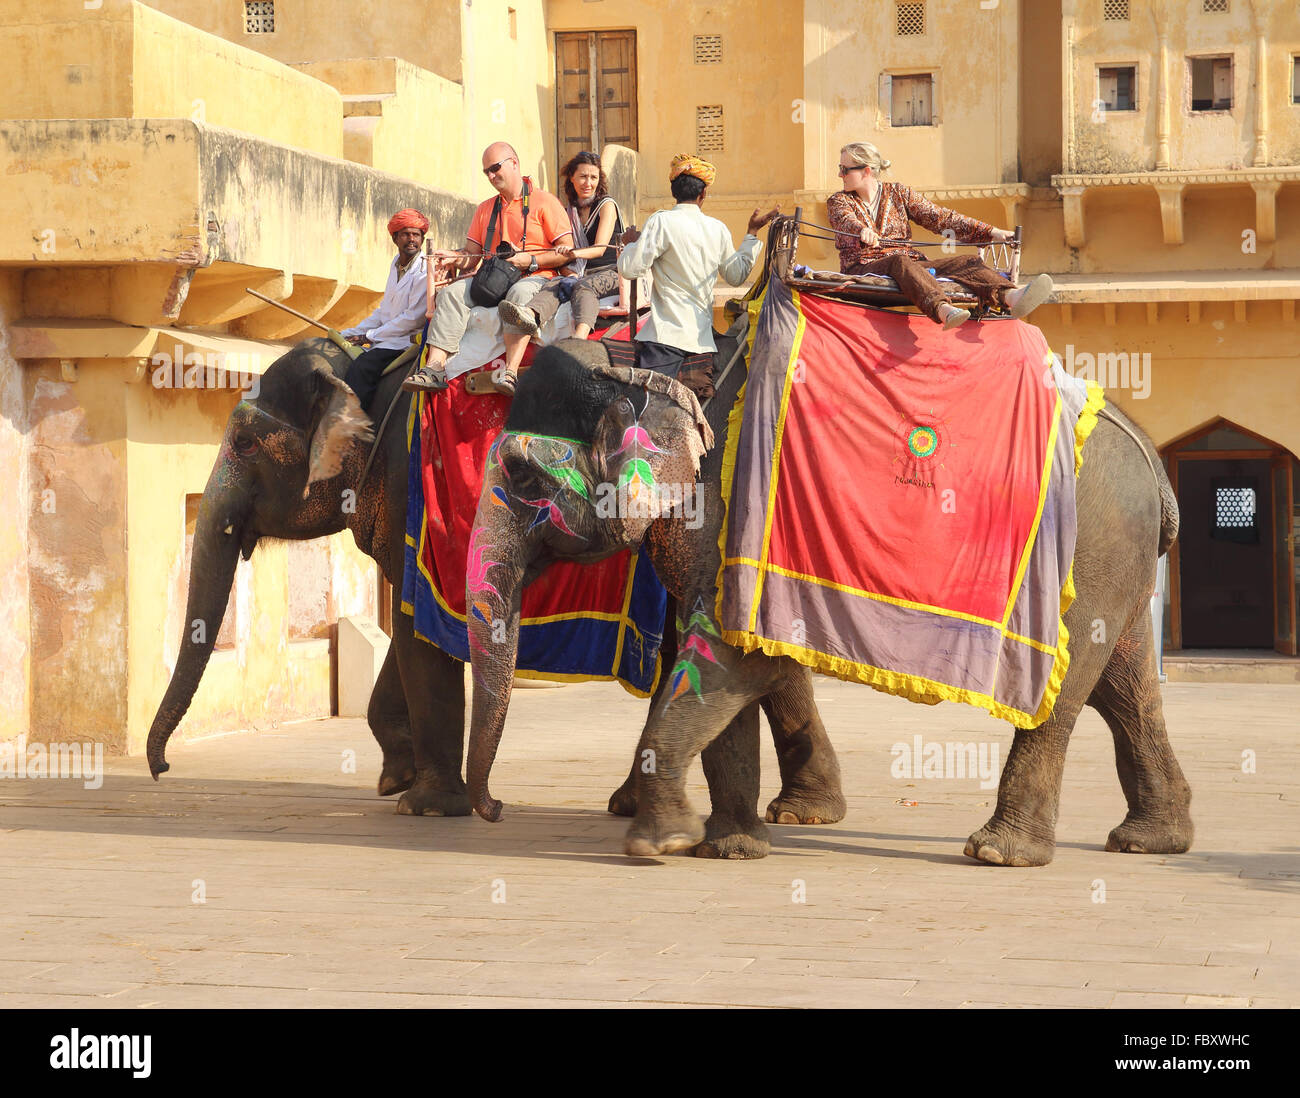 tourists on elephants in Jaipur fort India Stock Photo